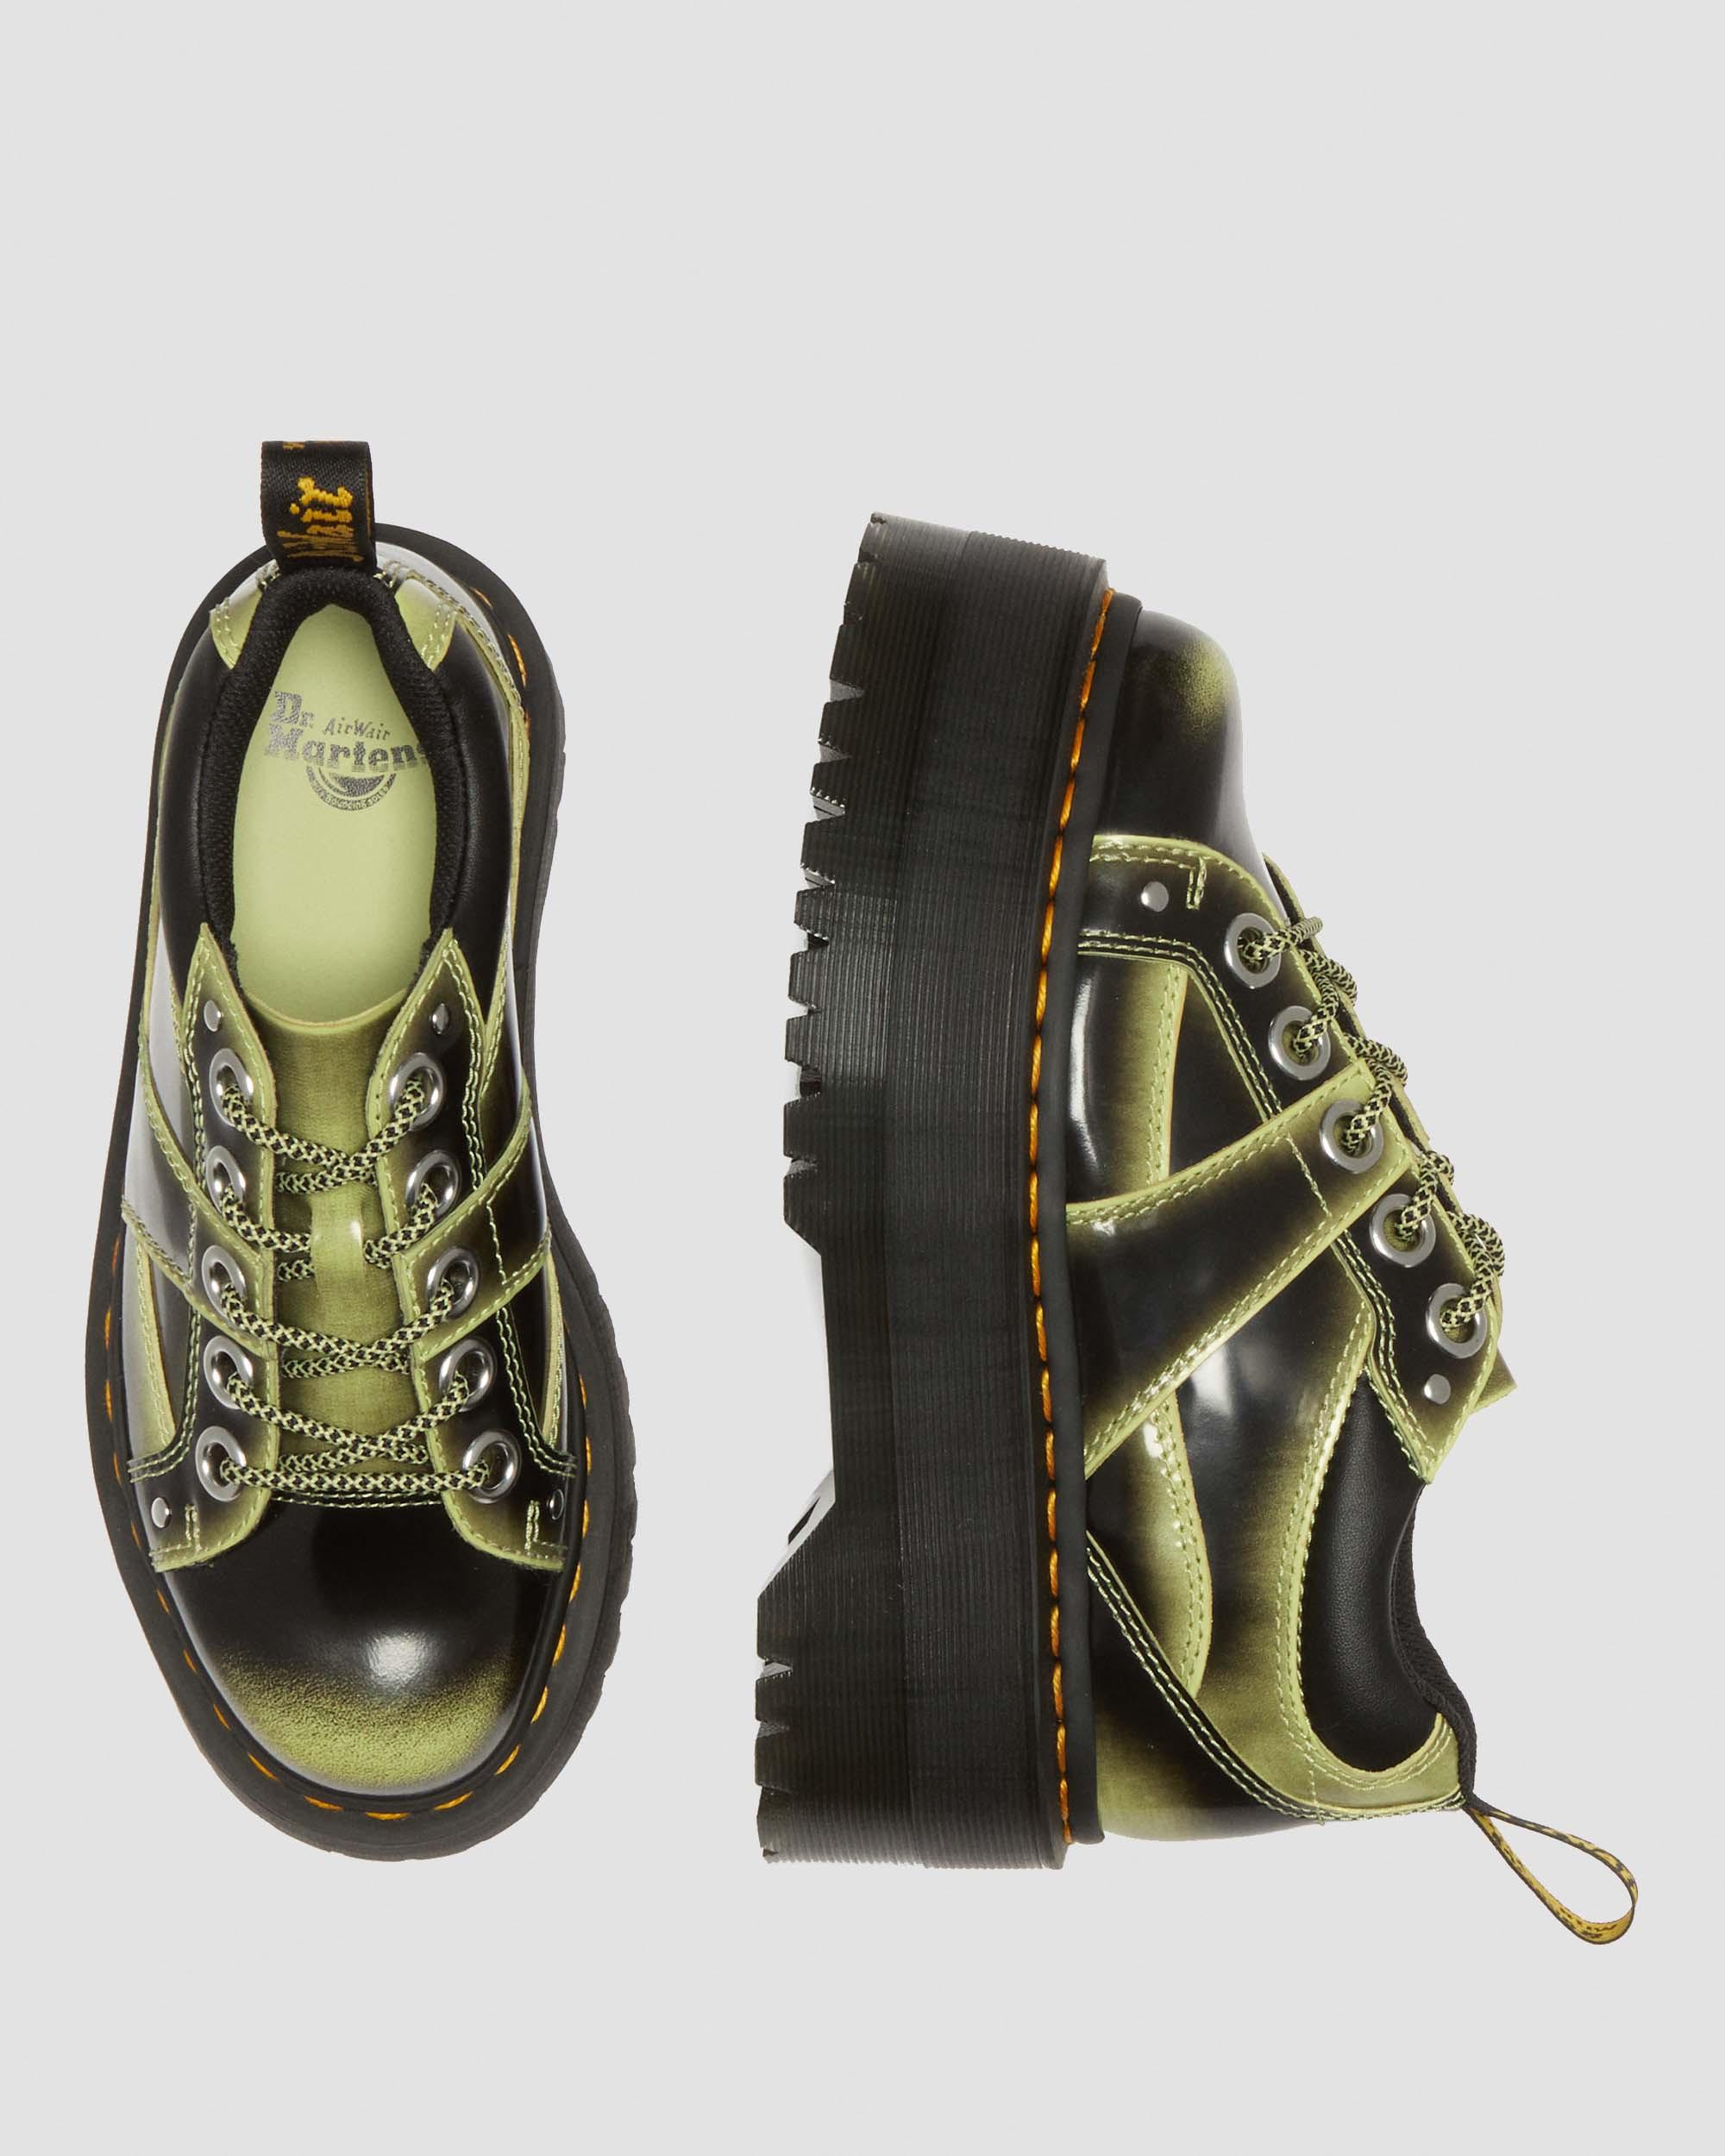 5-Eye Max Distressed Leather Platform Shoes in Lime Green